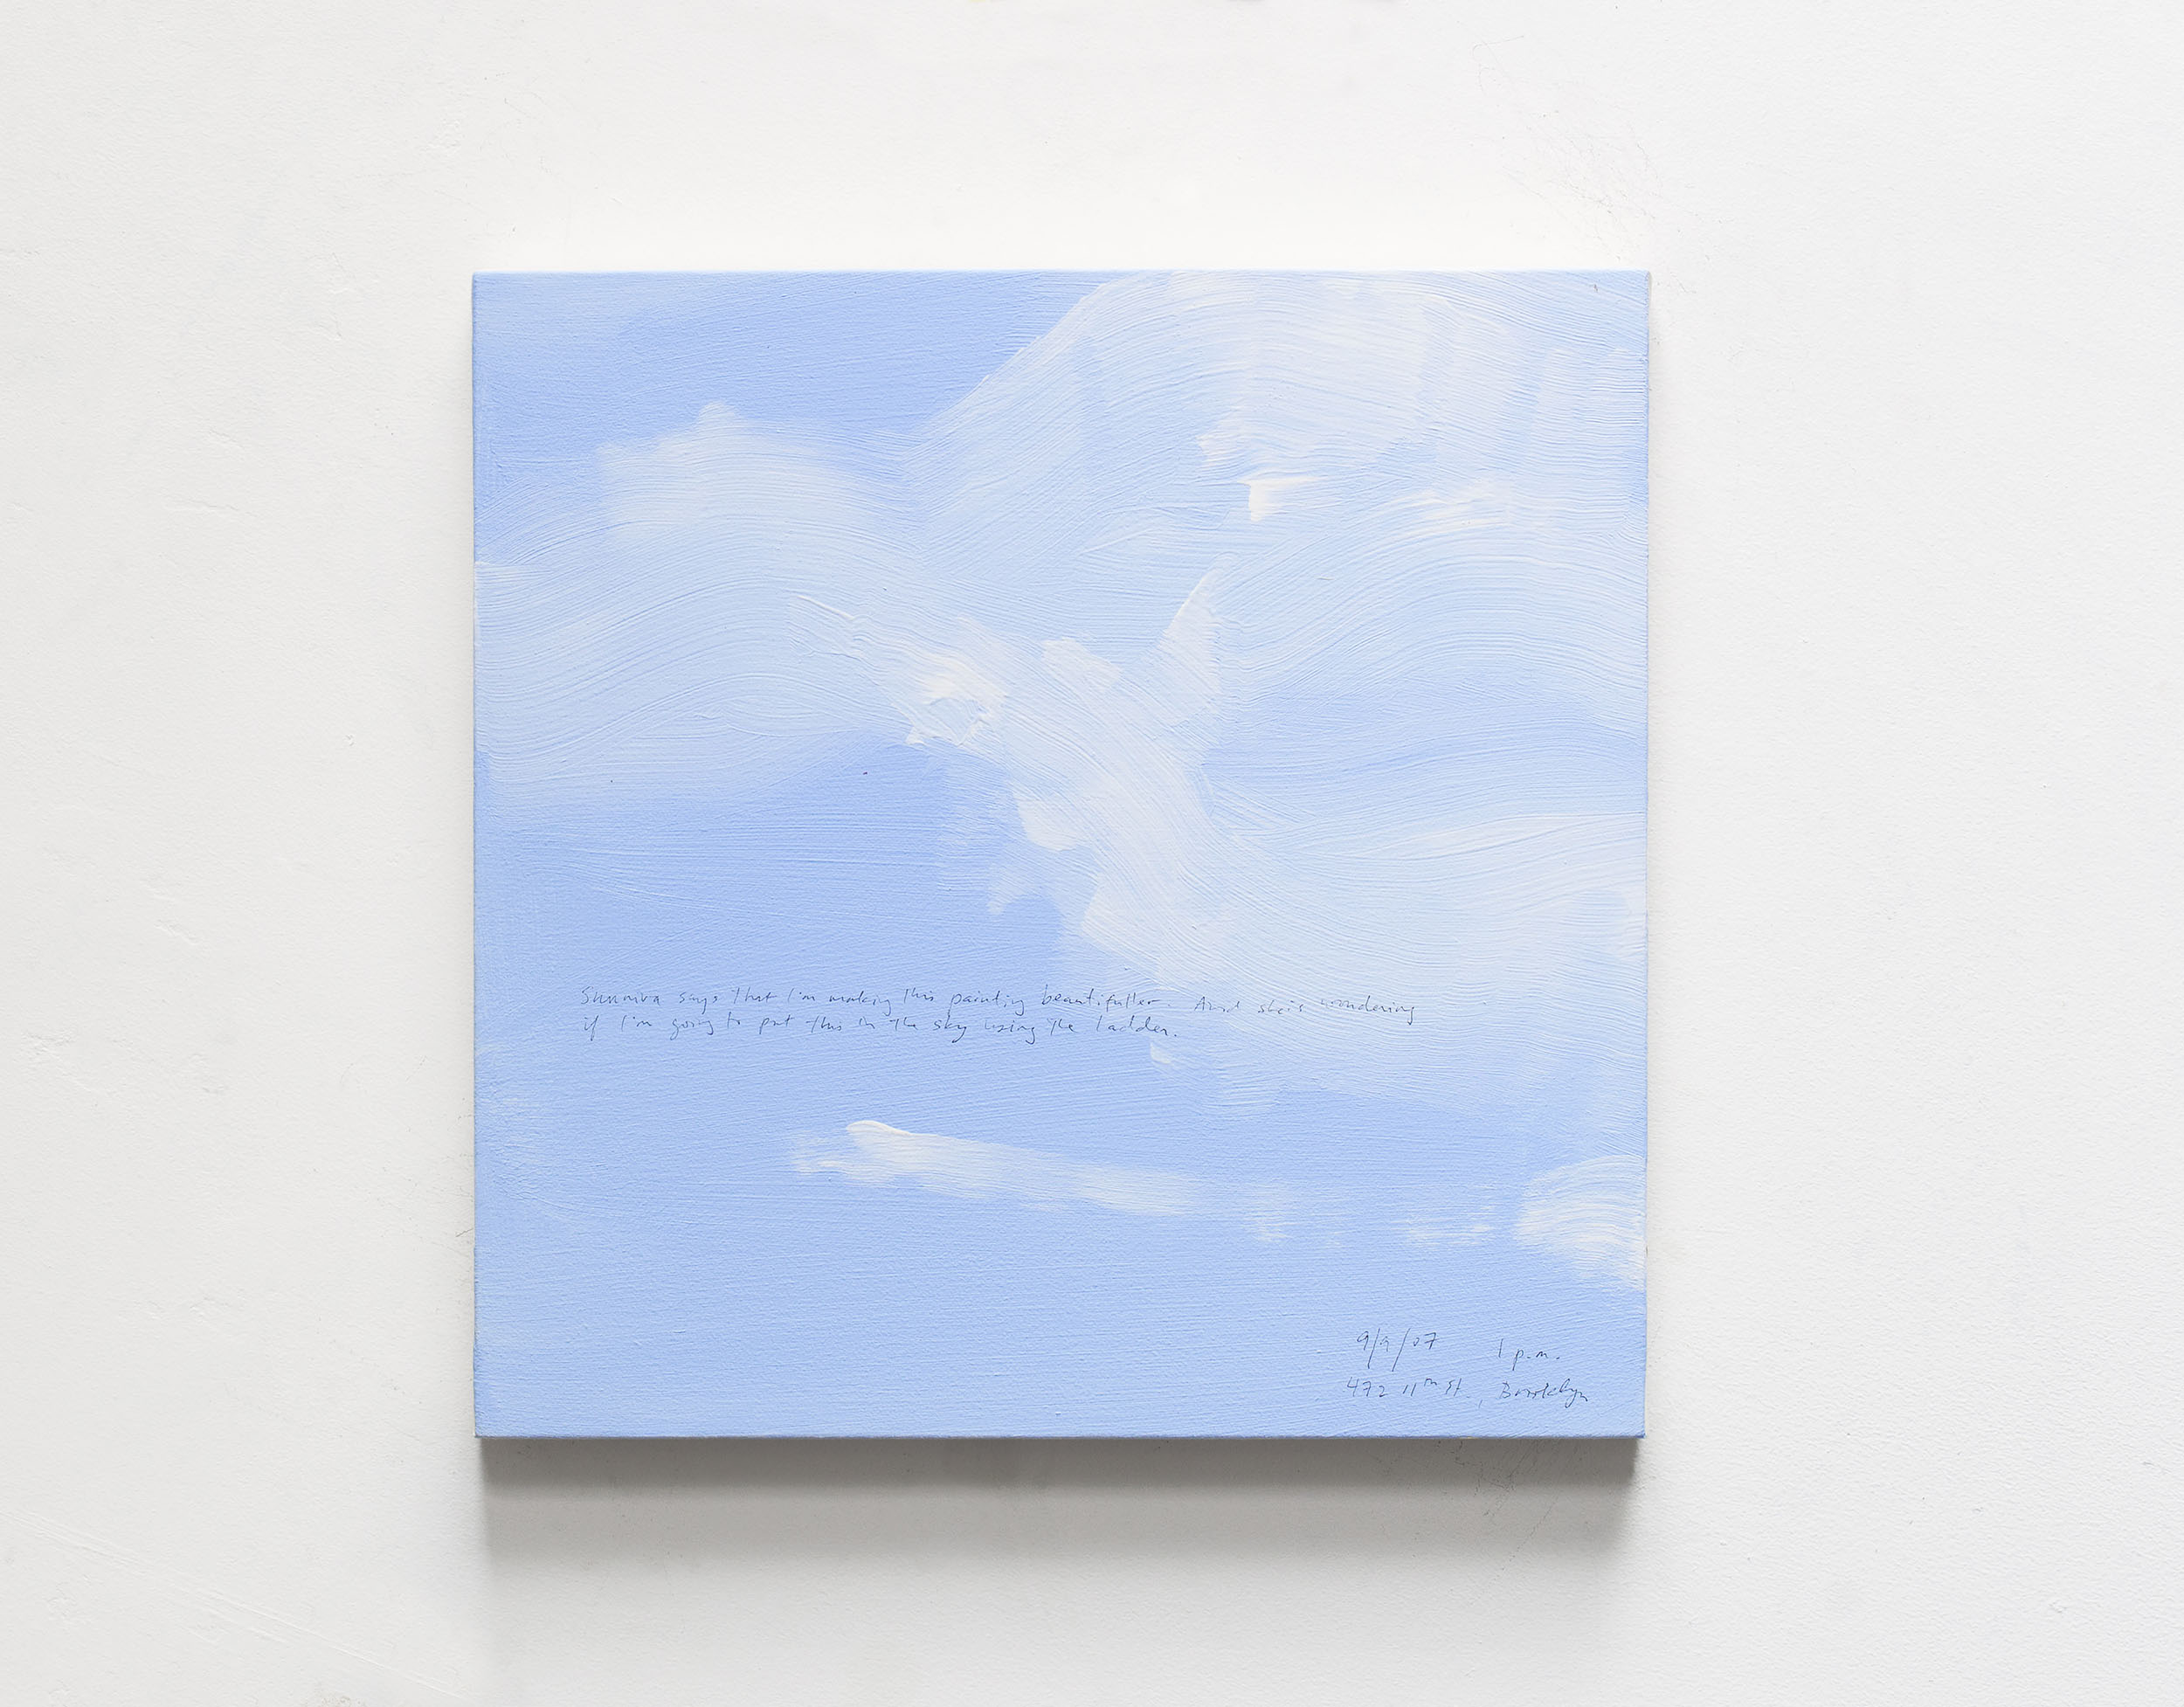 A 14 × 14 inch, acrylic painting of the sky. A journal entry is handwritten on the painting:

Sunniva says that I’m making this painting beautifuller. And she is wondering if I’m going to put this in the sky using the ladder.

9/9/07 1 p.m.
472 11th St., Brooklyn